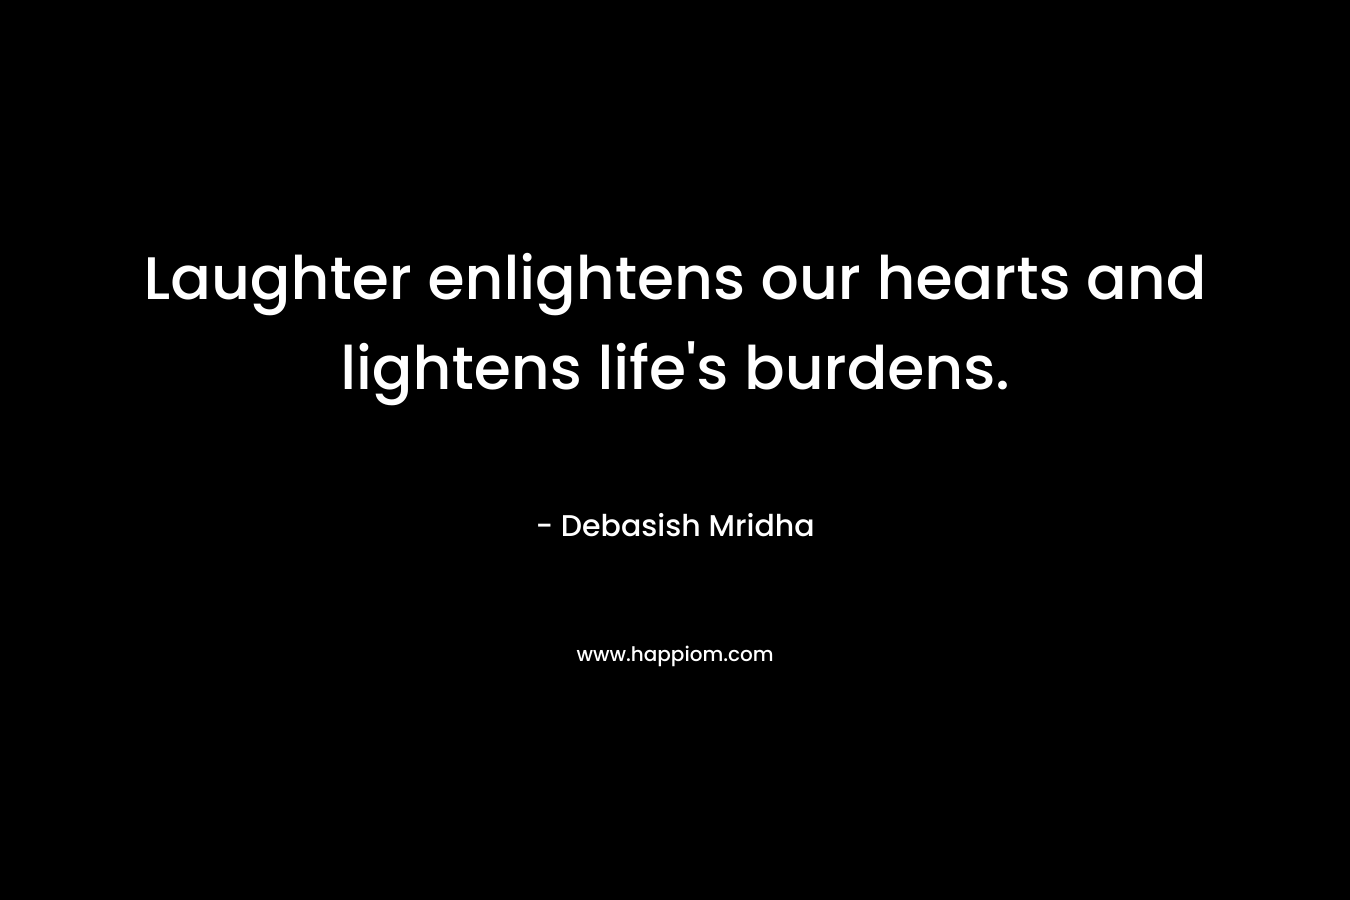 Laughter enlightens our hearts and lightens life’s burdens. – Debasish Mridha